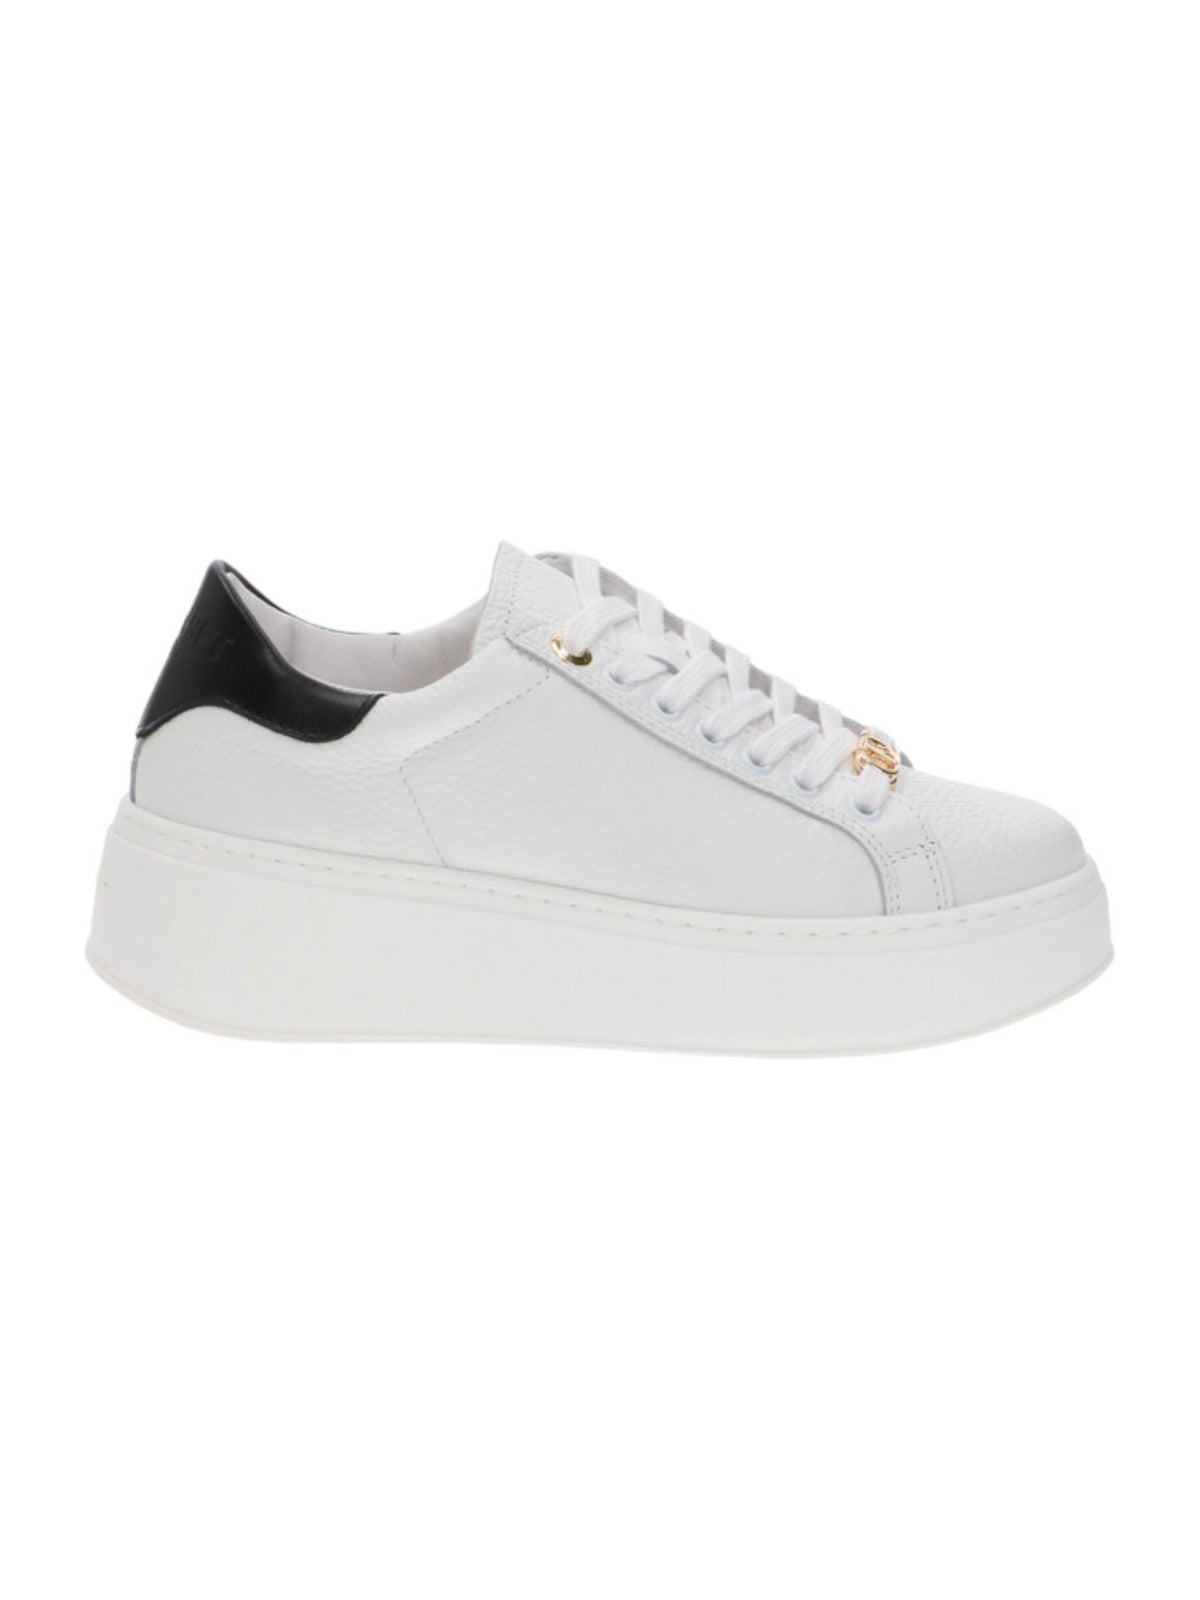 TWINSET Sneaker Donna  232TCP300 01870 Bianco